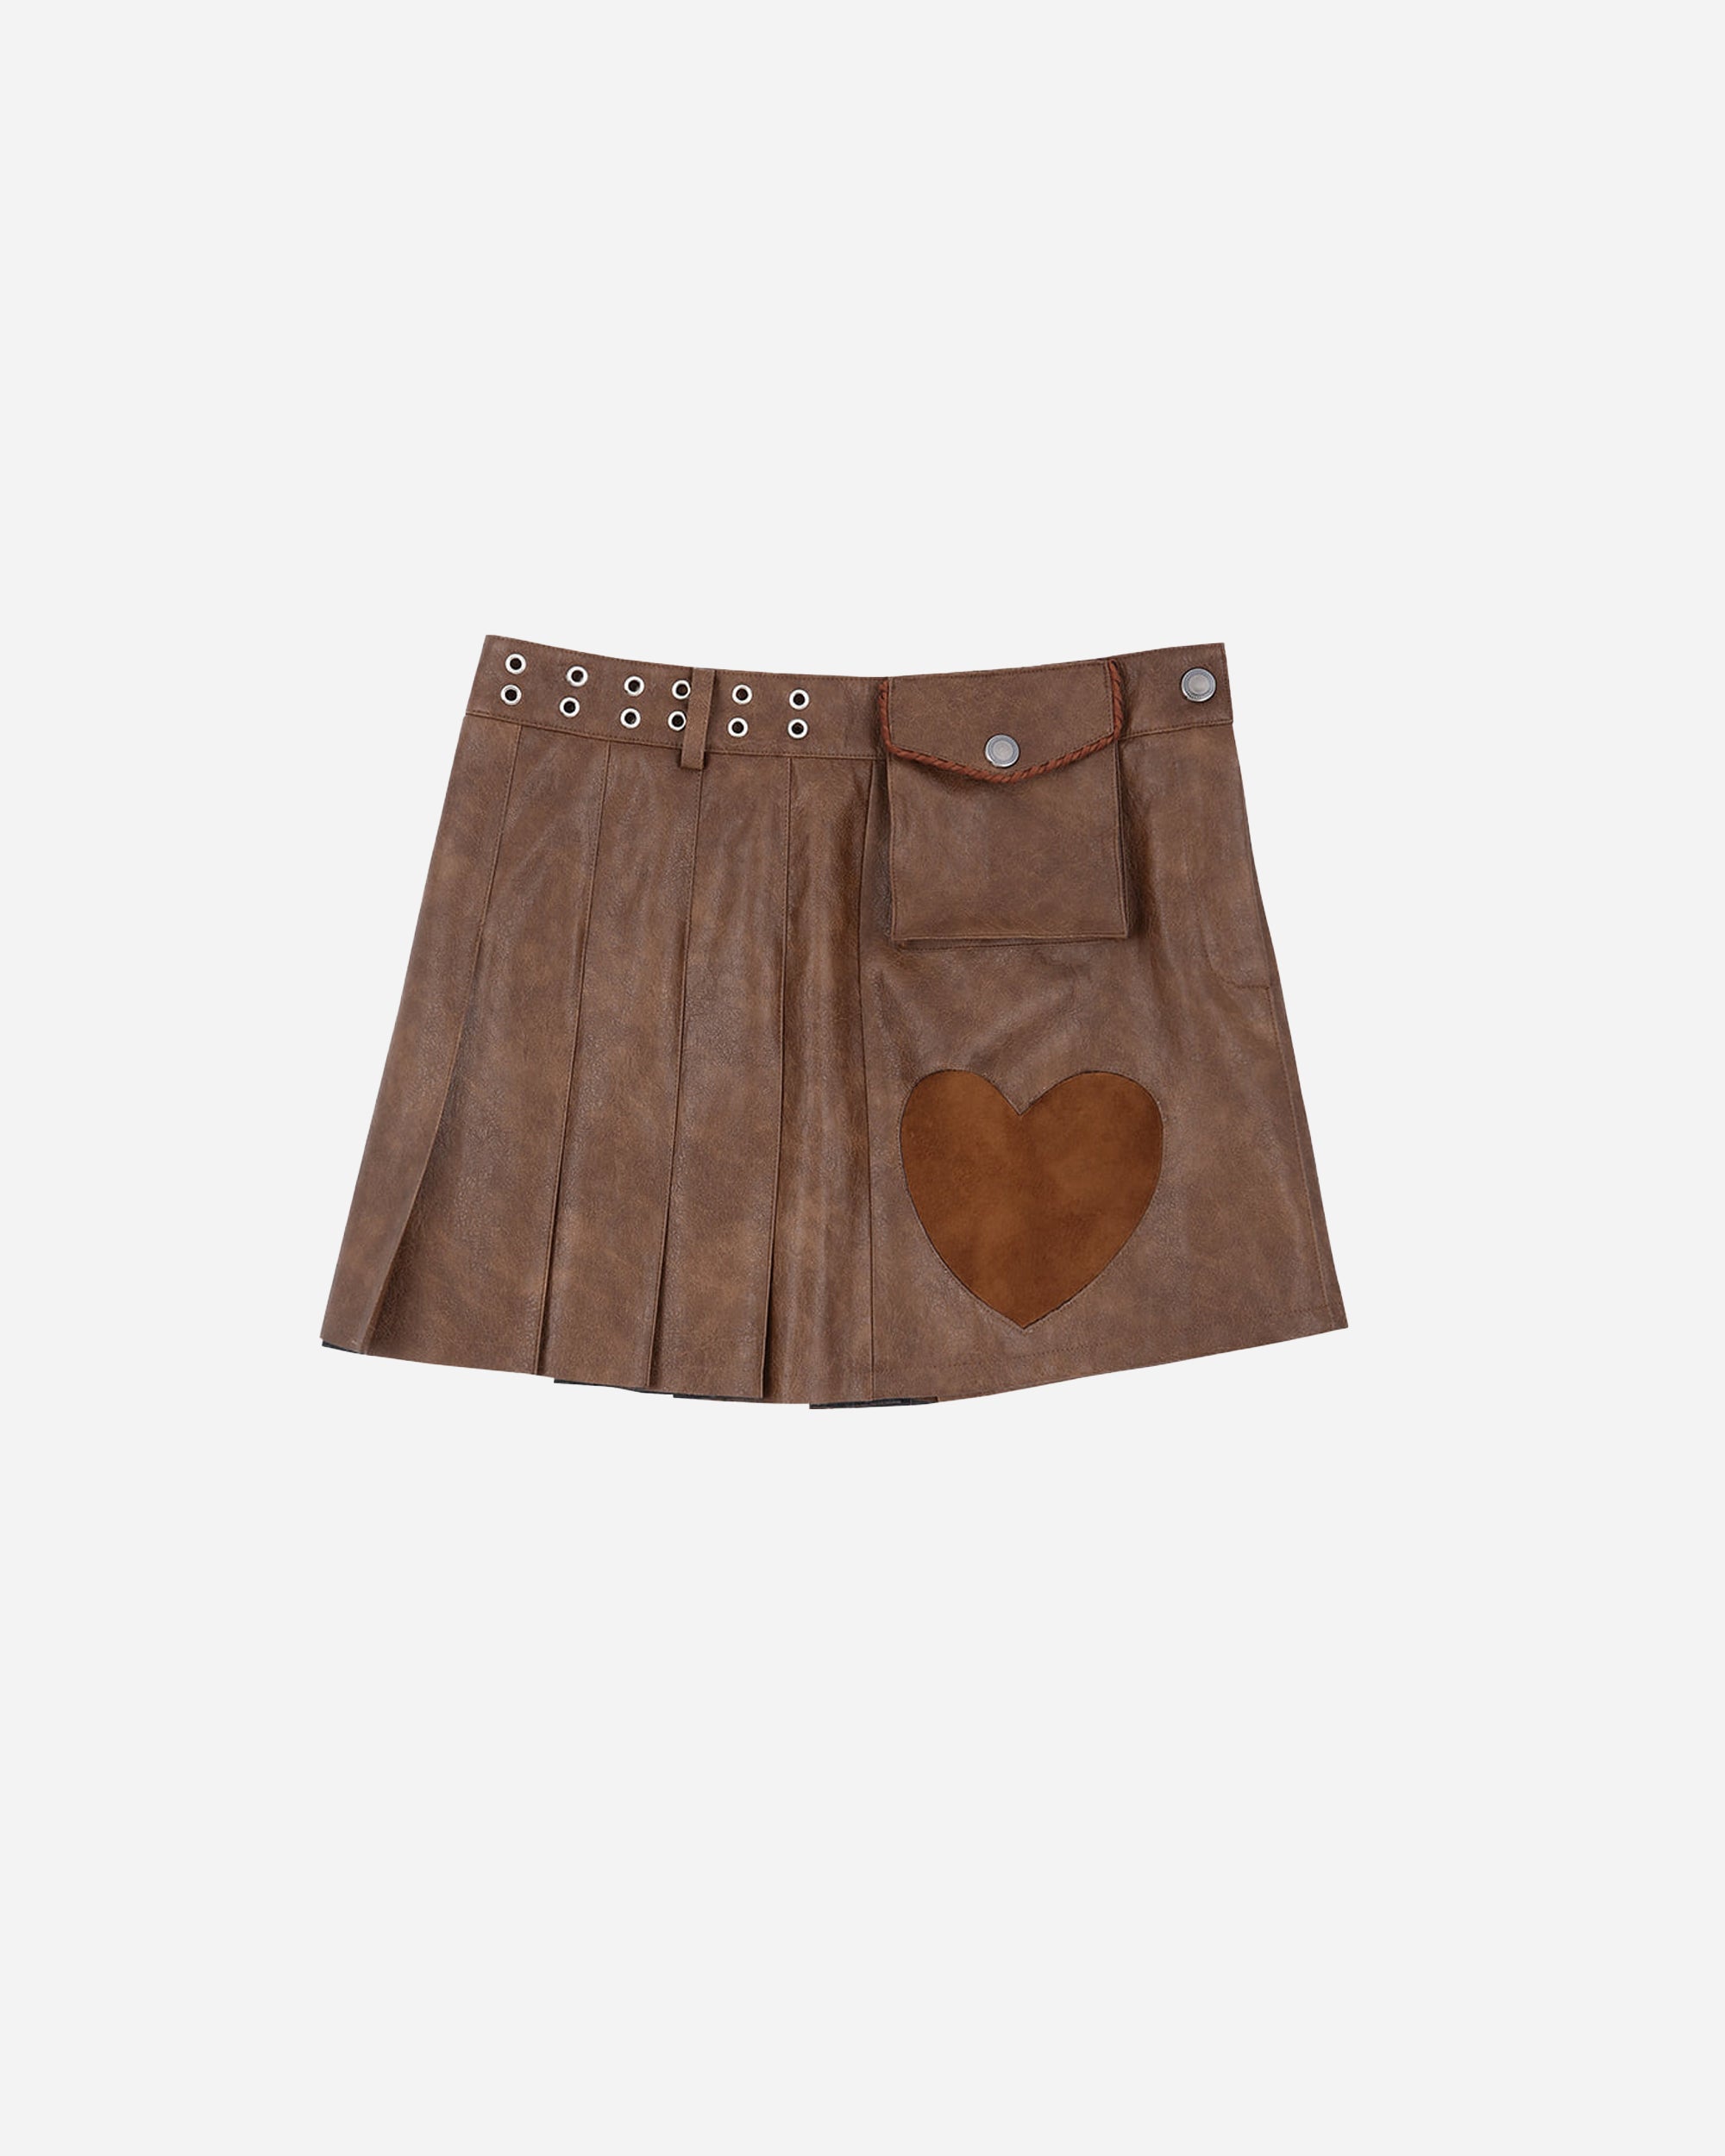 Andersson Bell Arina Heart & Pleats Faux Leather Skirt BROWN apa600w-BROWN